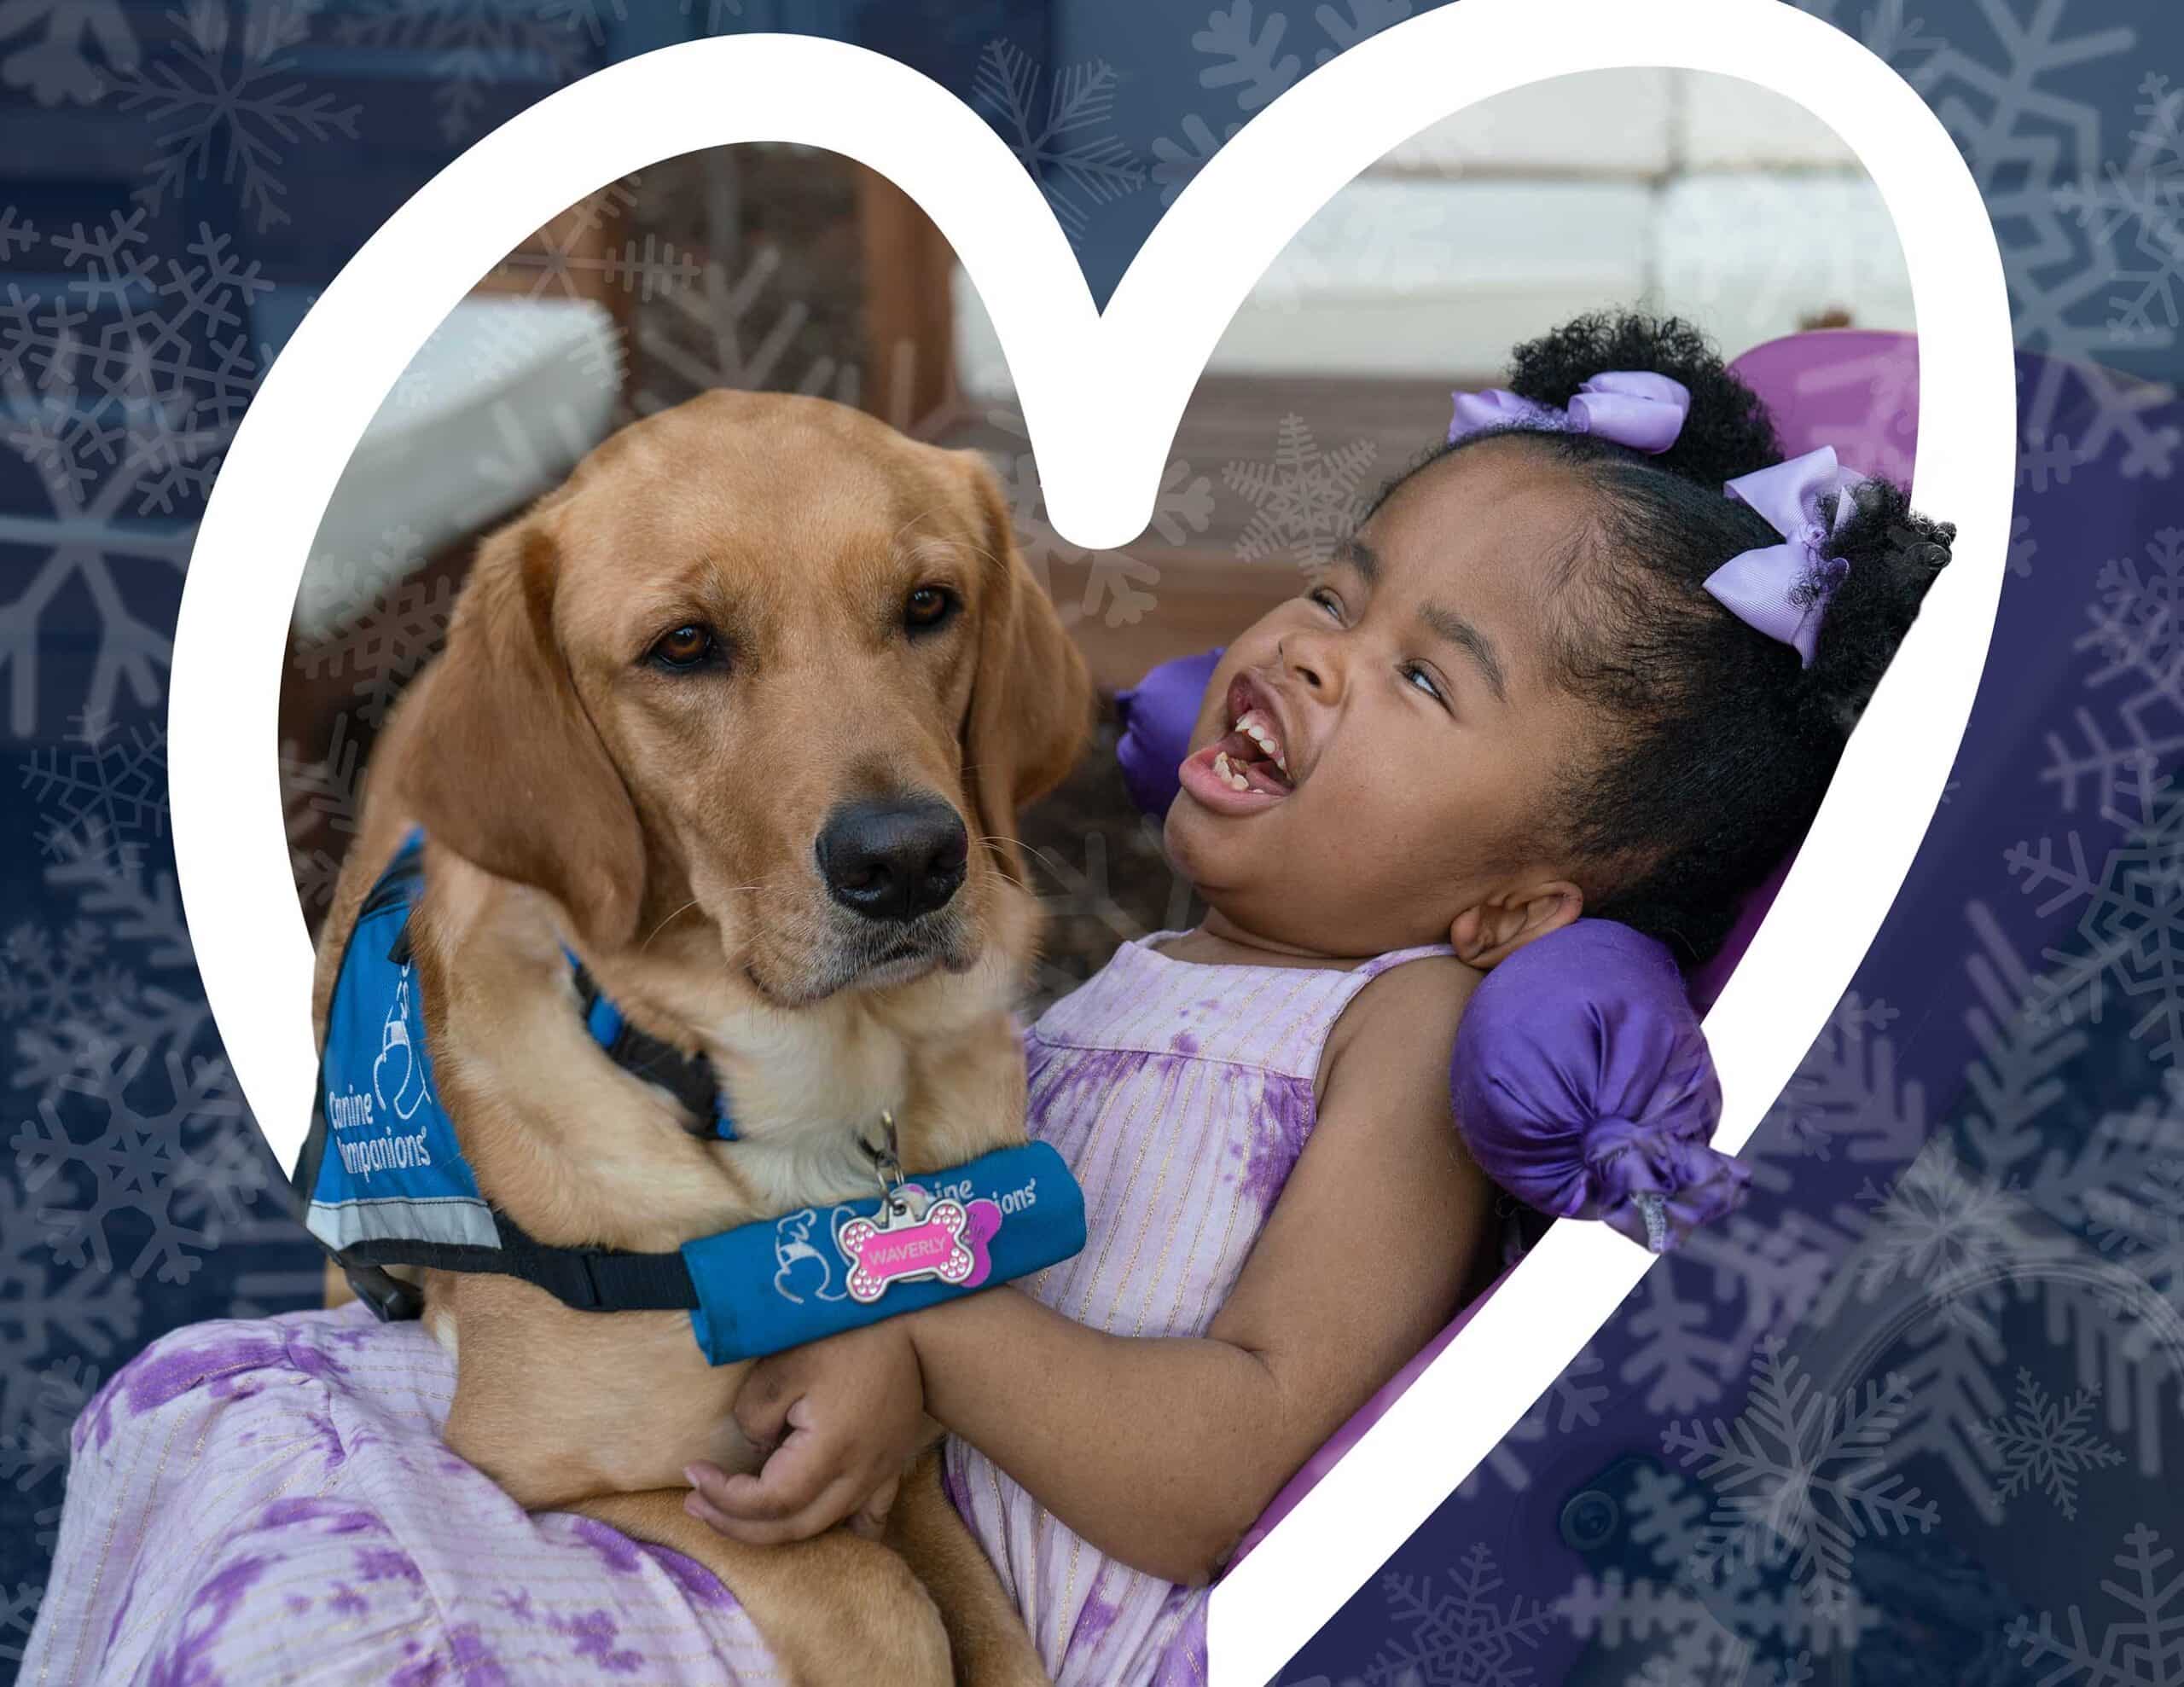 A heart with snowflakes around the image of a young girl with a yellow lab service dog in blue vest across her lap